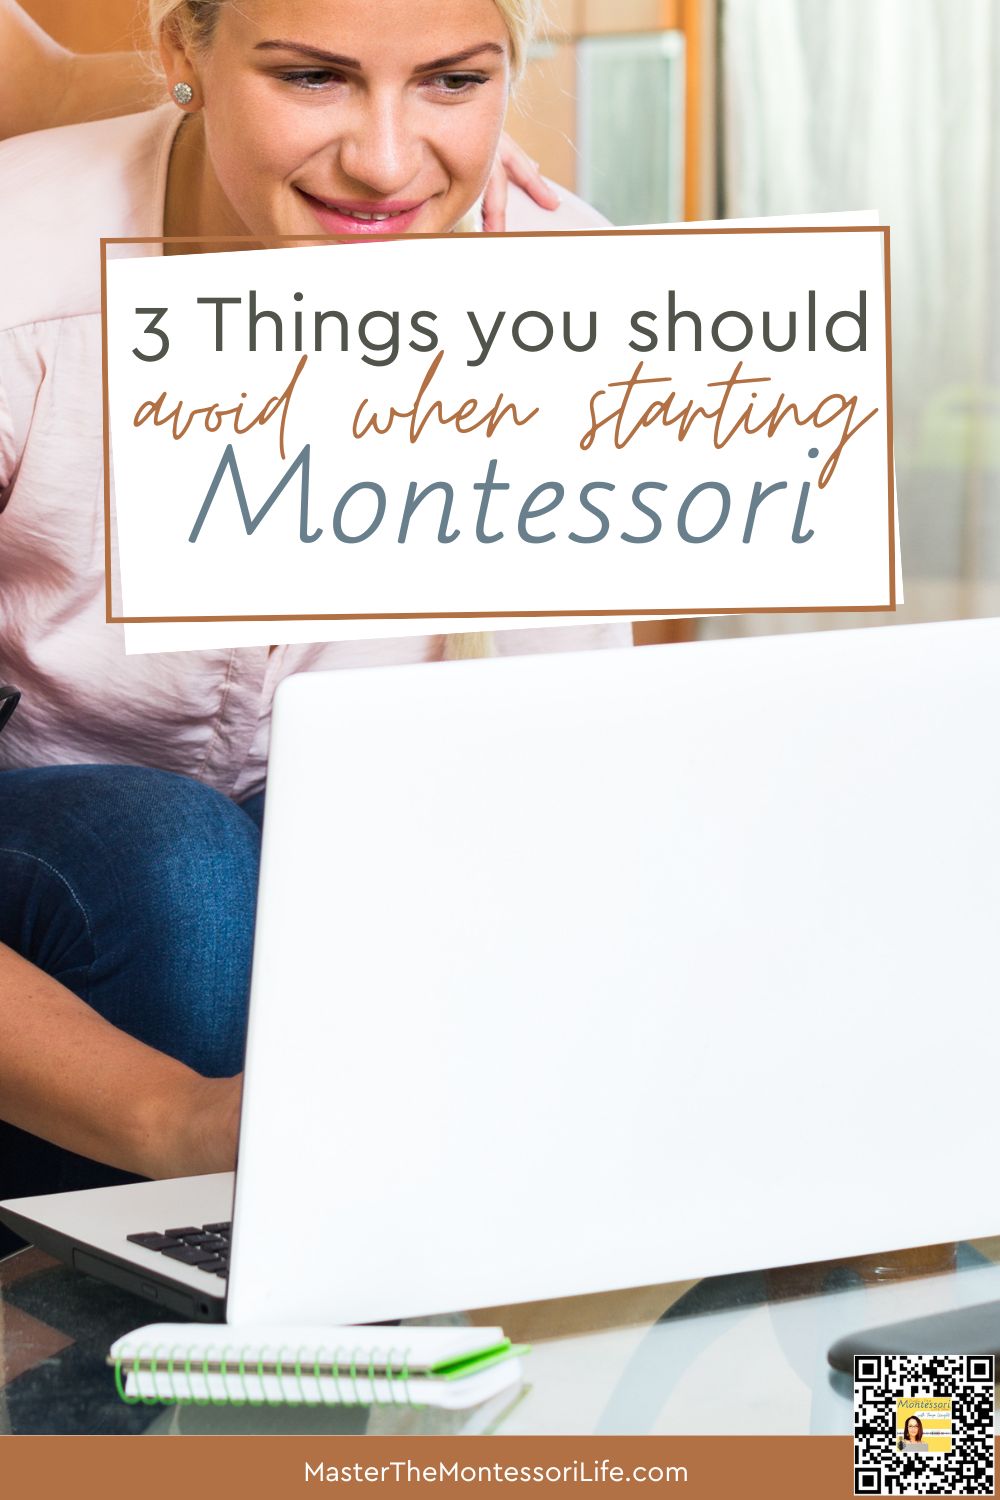 3 Things you should avoid when starting Montessori